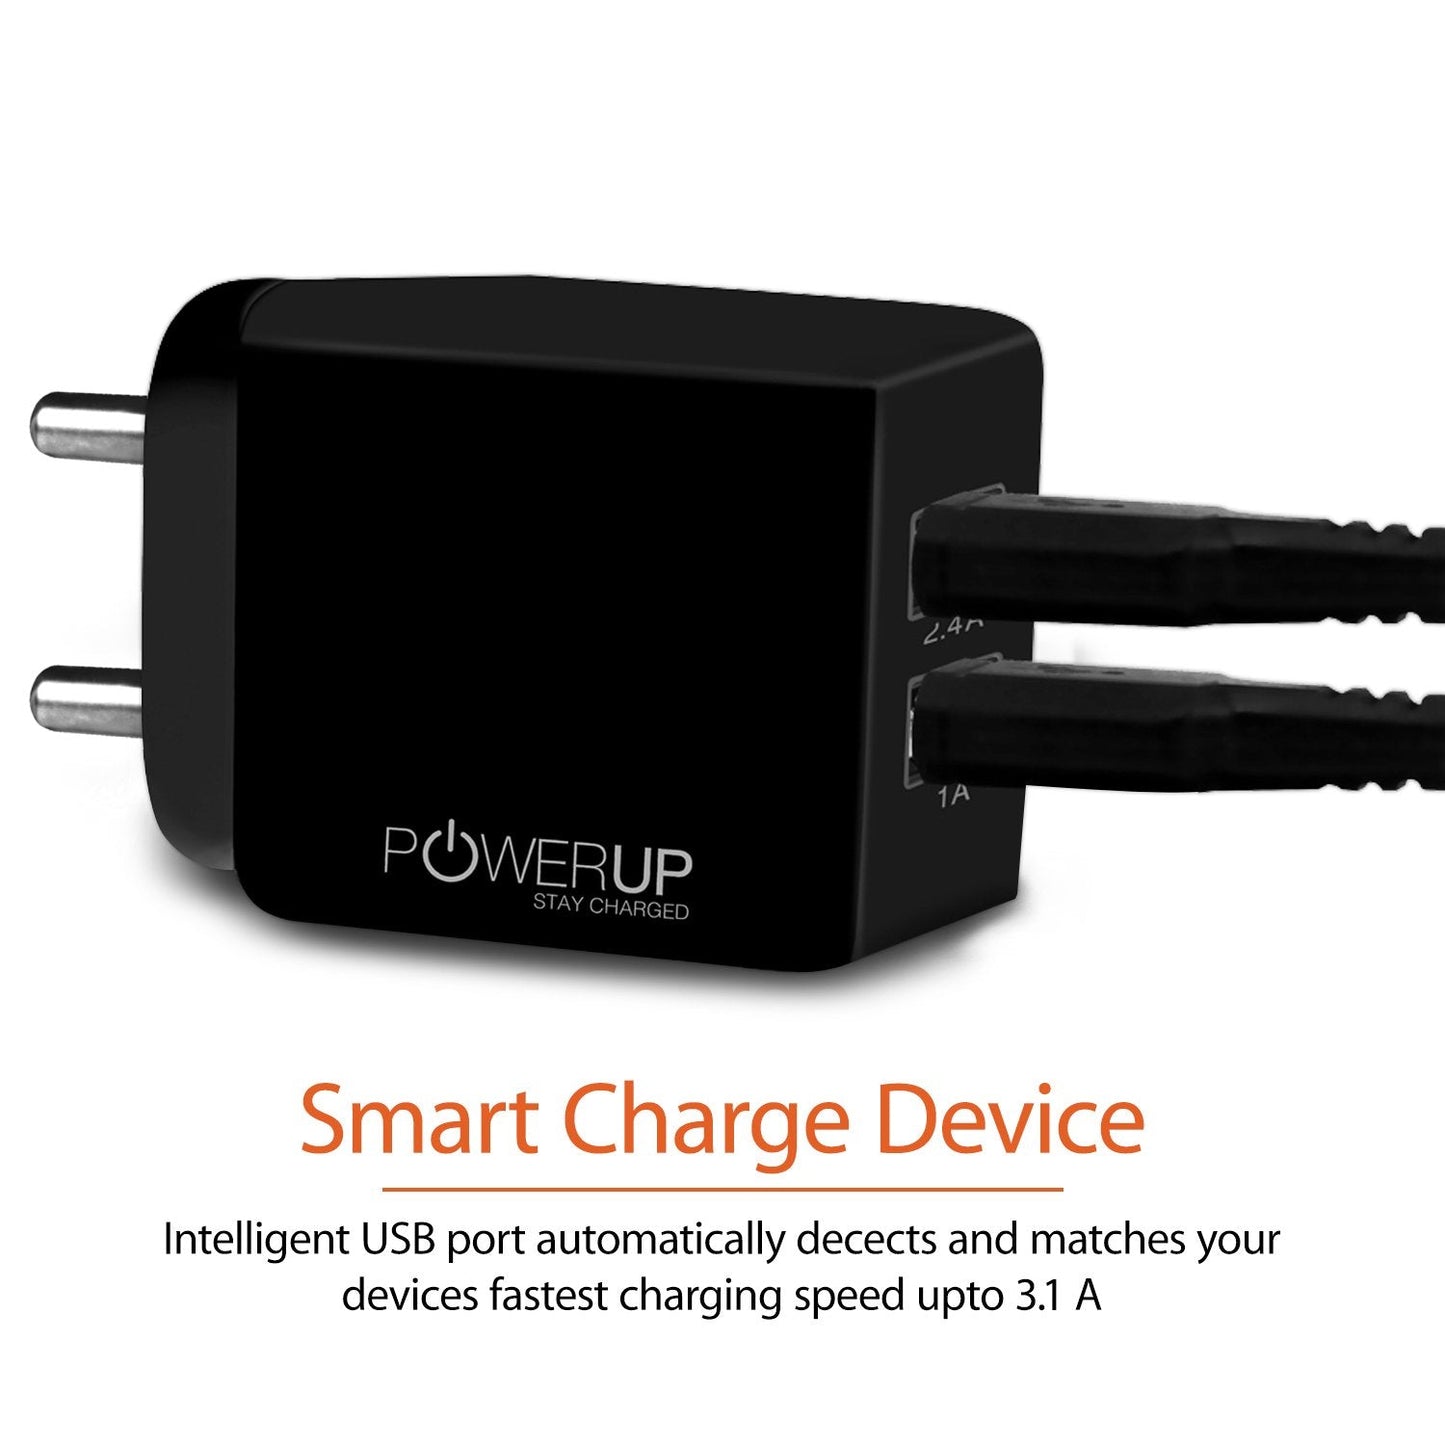 Powerup Amp 3.4a Wall Charger 17w 2usb Port Ultra Smart - Black